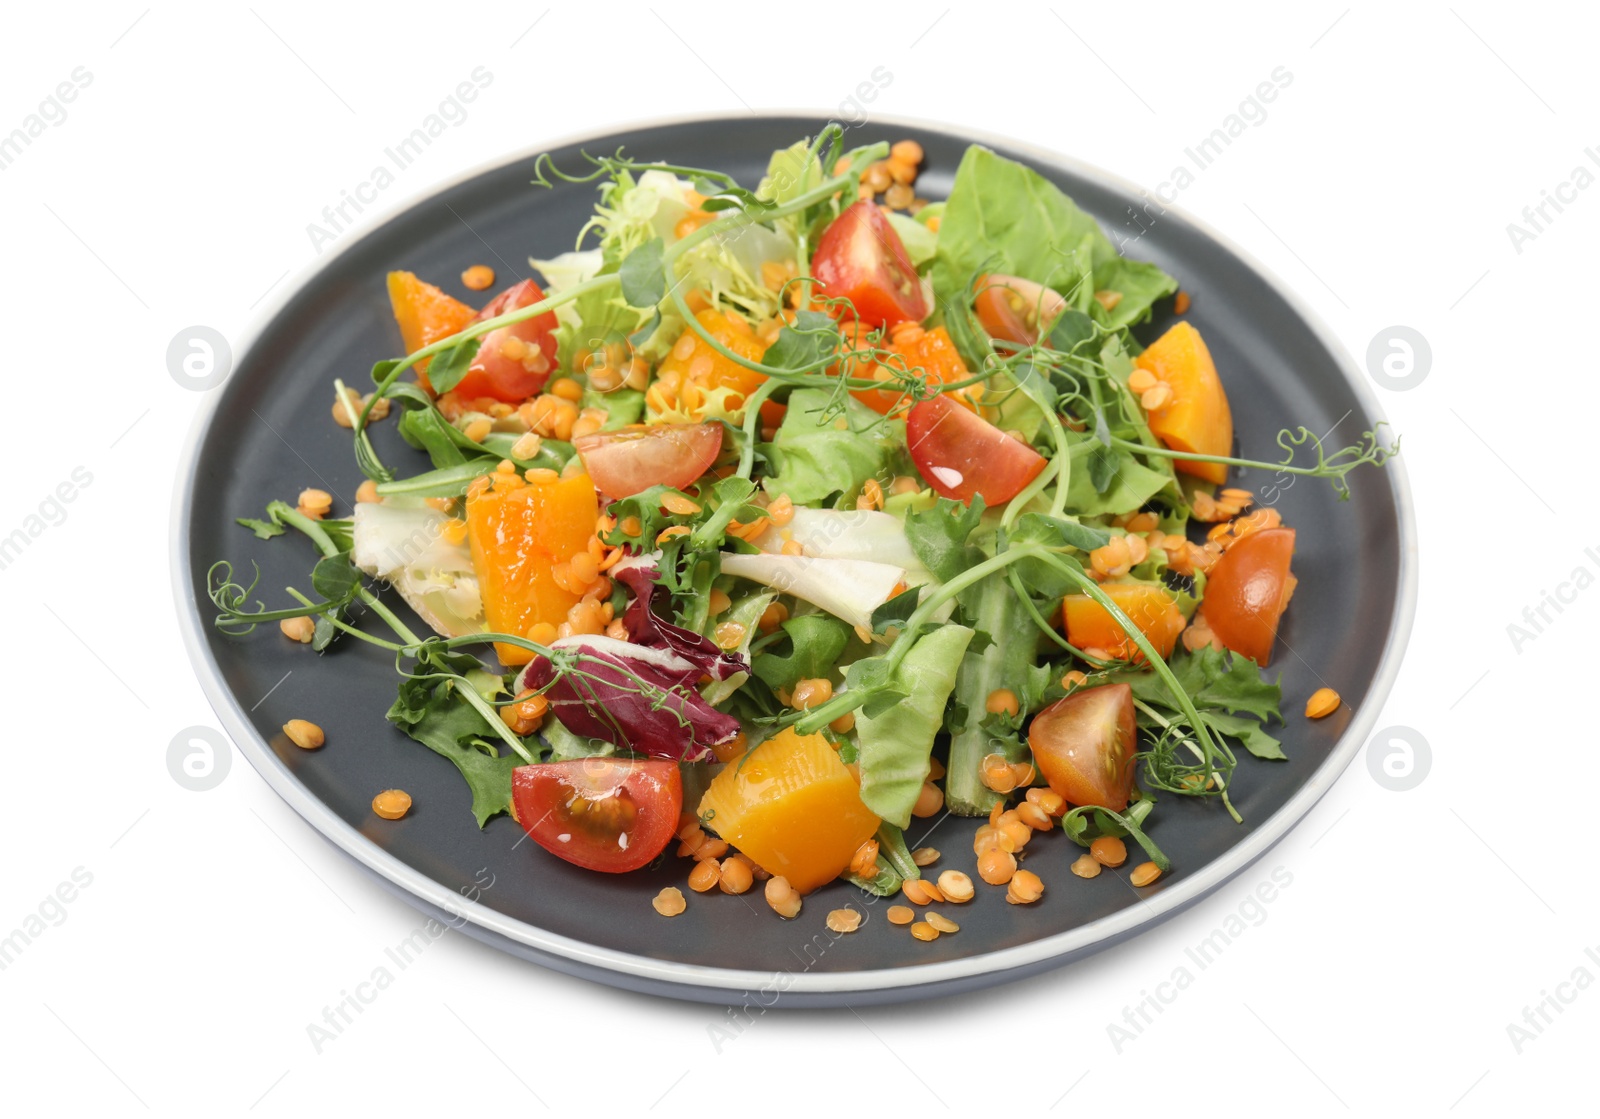 Photo of Plate of delicious salad with lentils and vegetables isolated on white